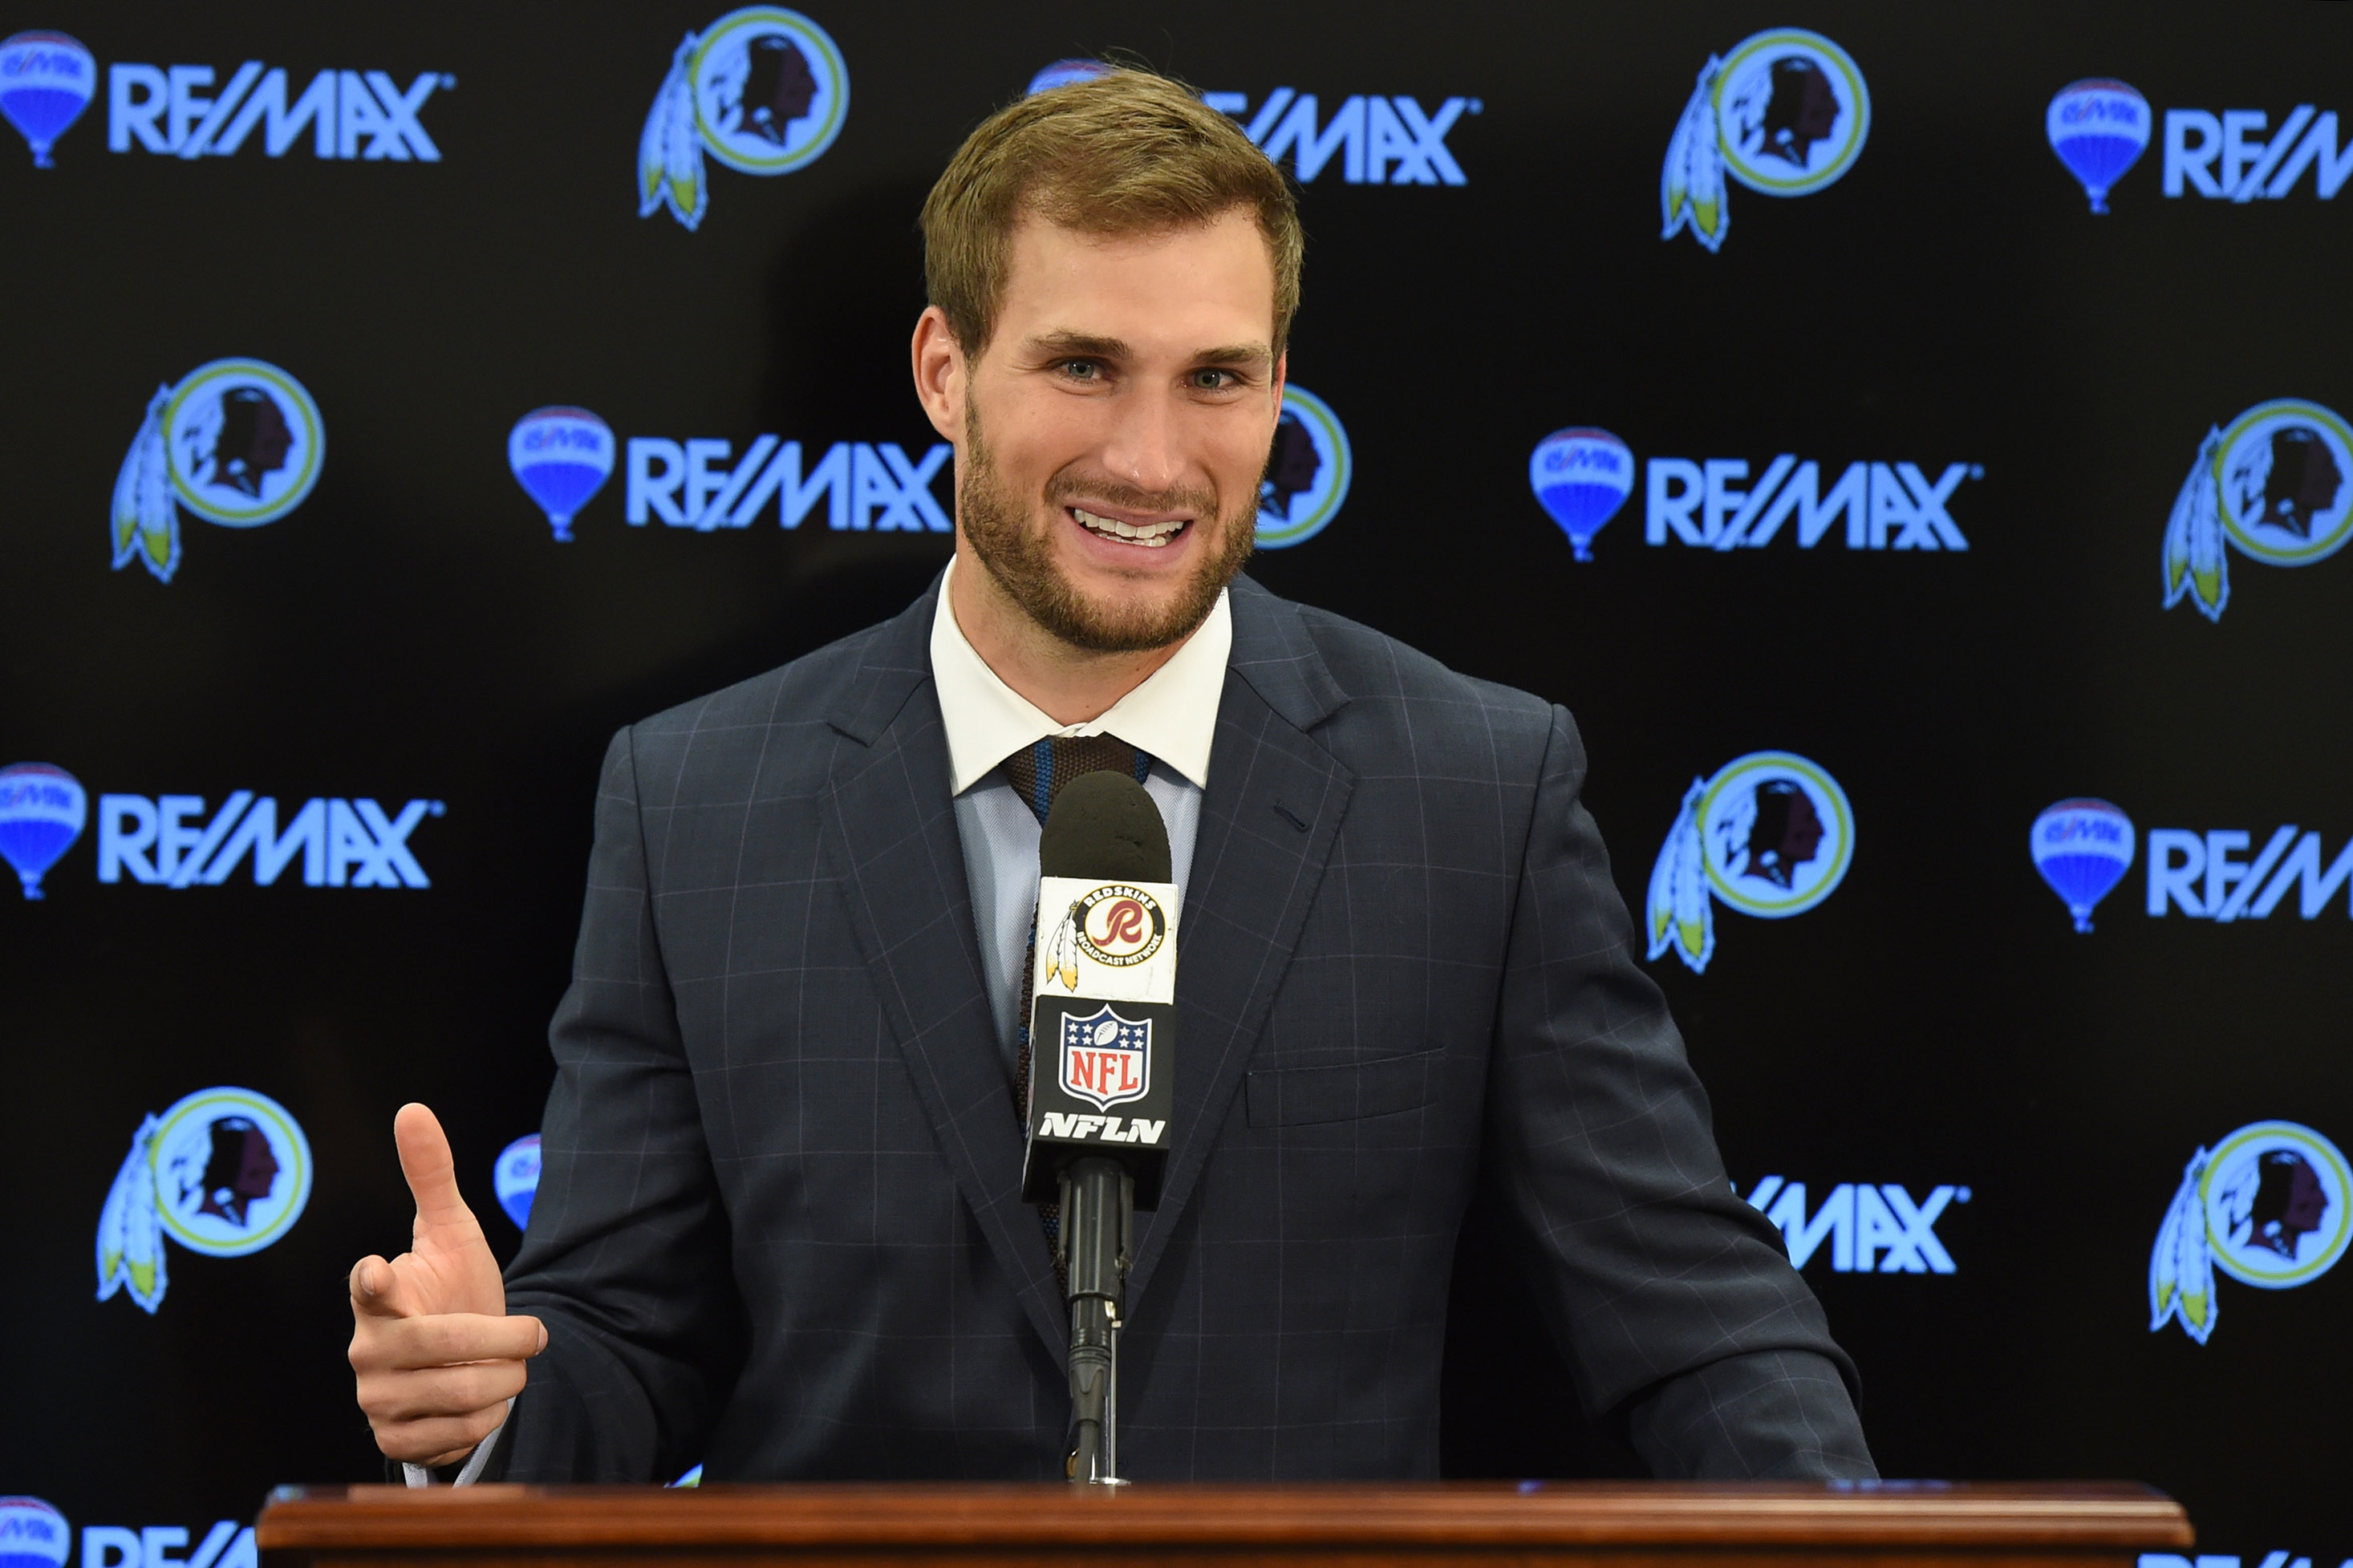 Kirk Cousins wearing a black suit while talking on a mic